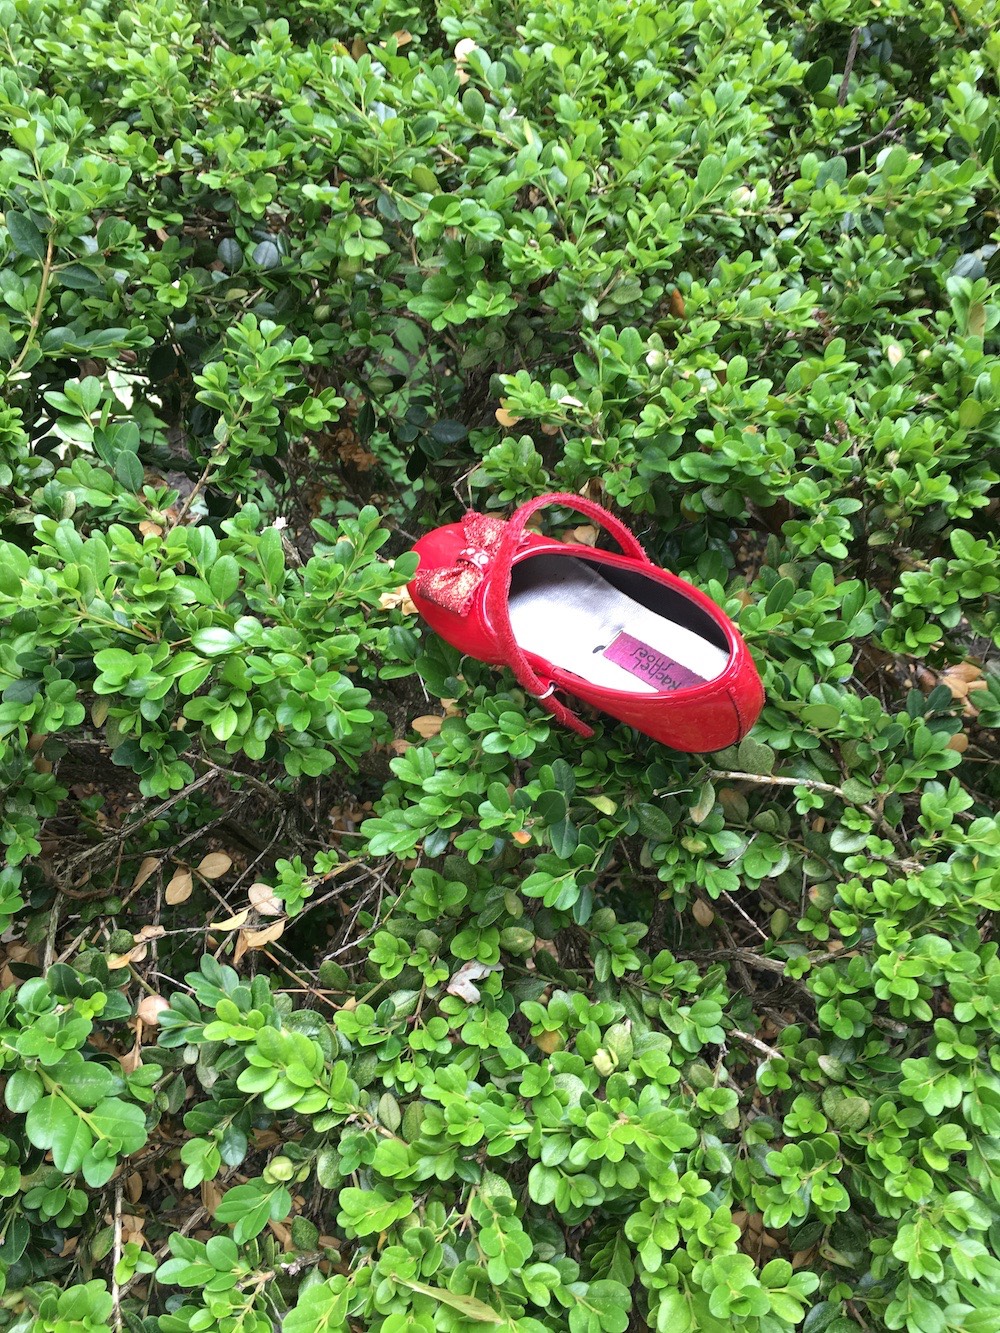 The little red slipper sitting on a bush.